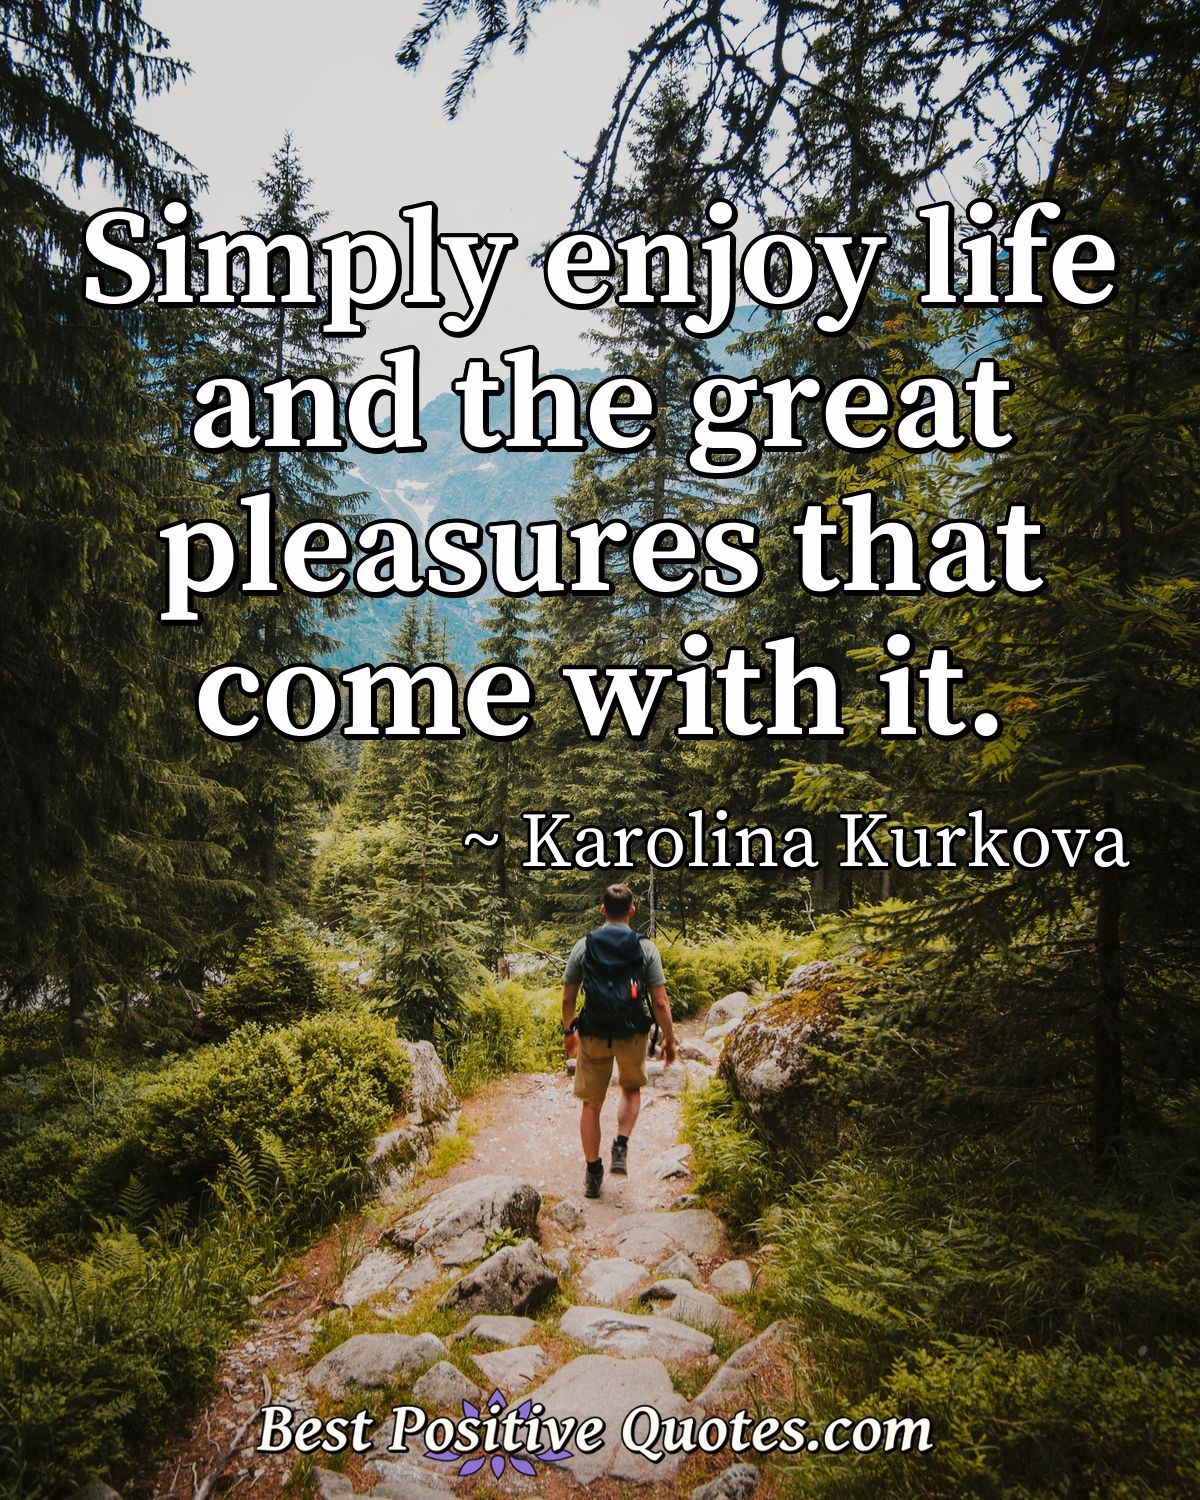 Simply enjoy life and the great pleasures that come with it. - Karolina Kurkova